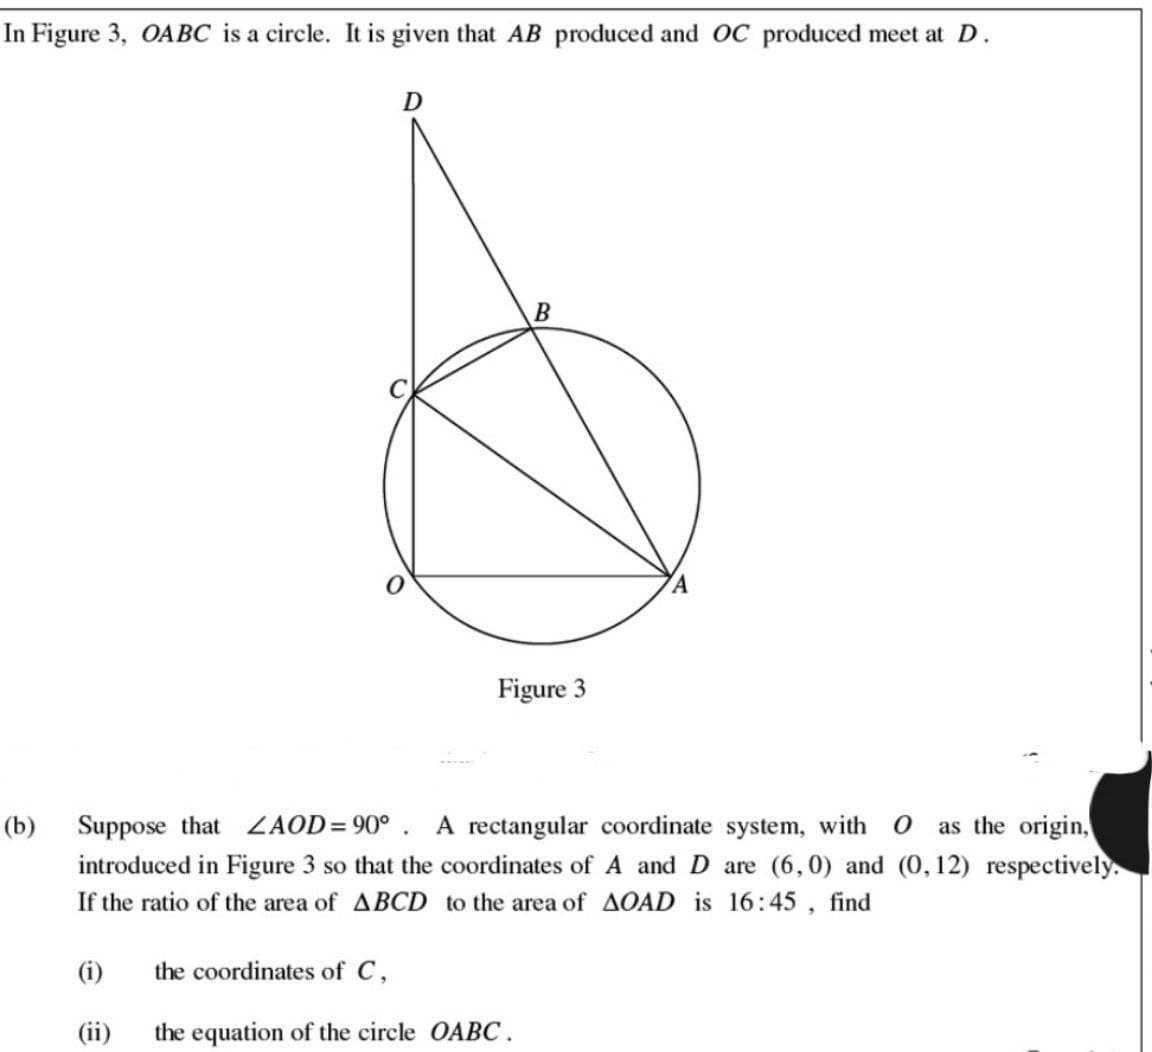 In Figure 3, OABC is a circle. It is given that AB produced and OC produced meet at D.
D
B
Figure 3
A
(b) Suppose that ZAOD=90°. A rectangular coordinate system, with O as the origin,
introduced in Figure 3 so that the coordinates of A and D are (6,0) and (0,12) respectively.
If the ratio of the area of ABCD to the area of AOAD is 16:45, find
(i)
the coordinates of C,
(ii)
the equation of the circle OABC.